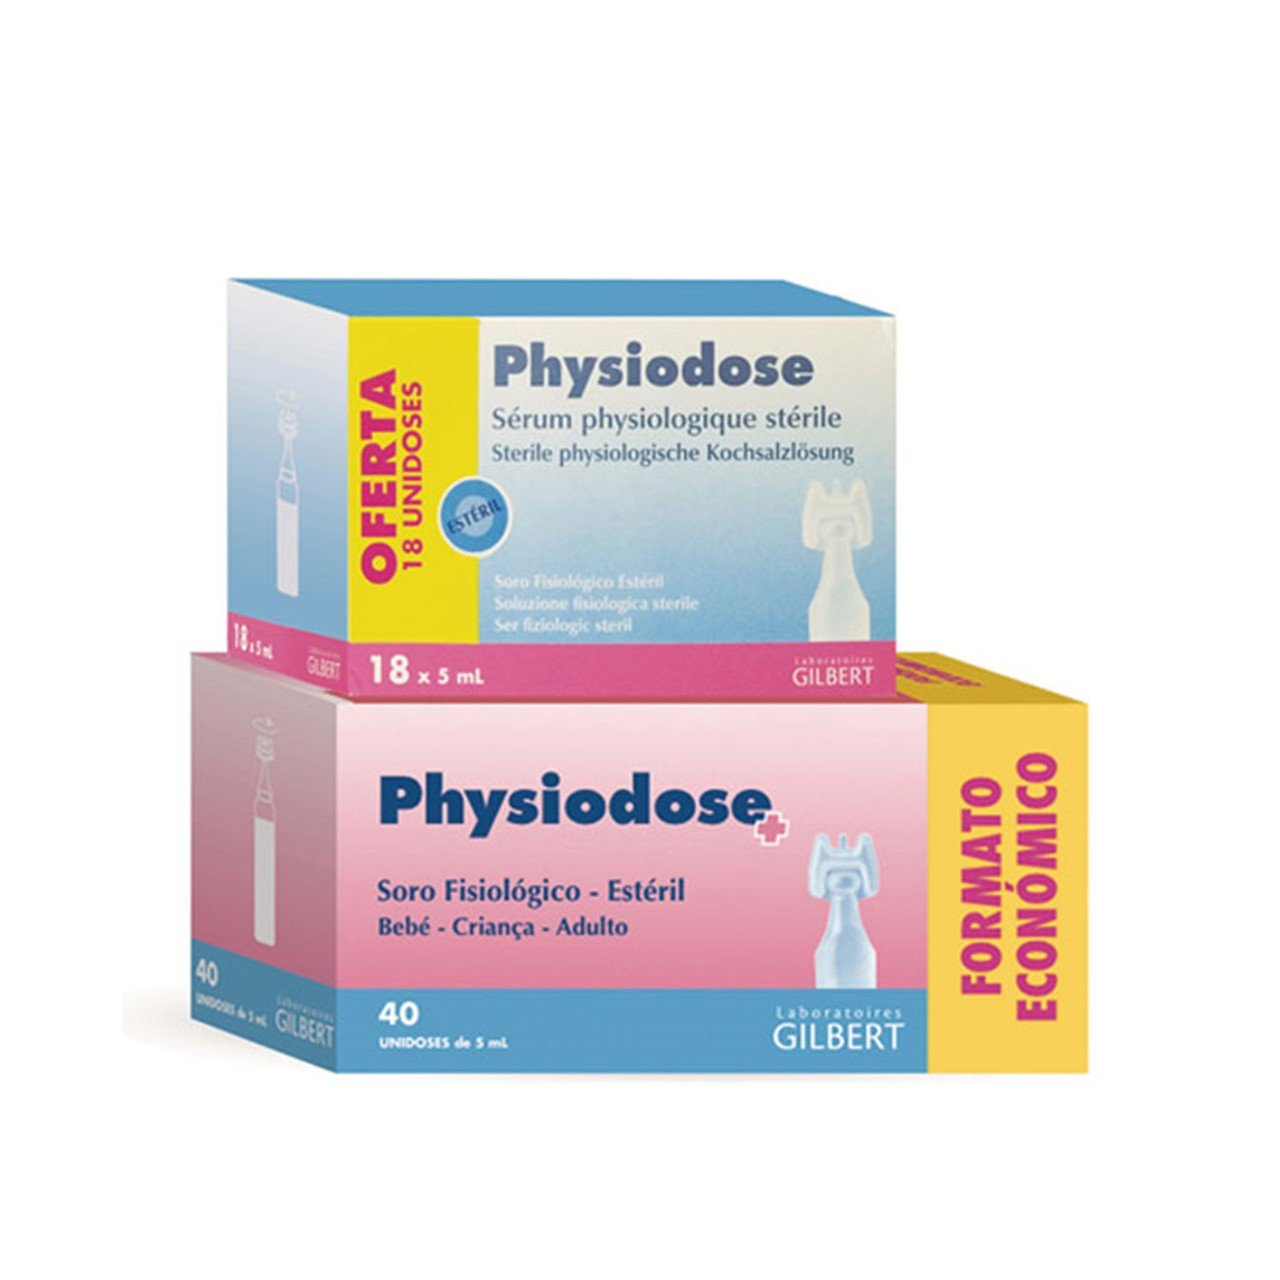 Gilbert Physiodose Sterile Physiological Serum 40 Single Doses For Baby 3 Pack 